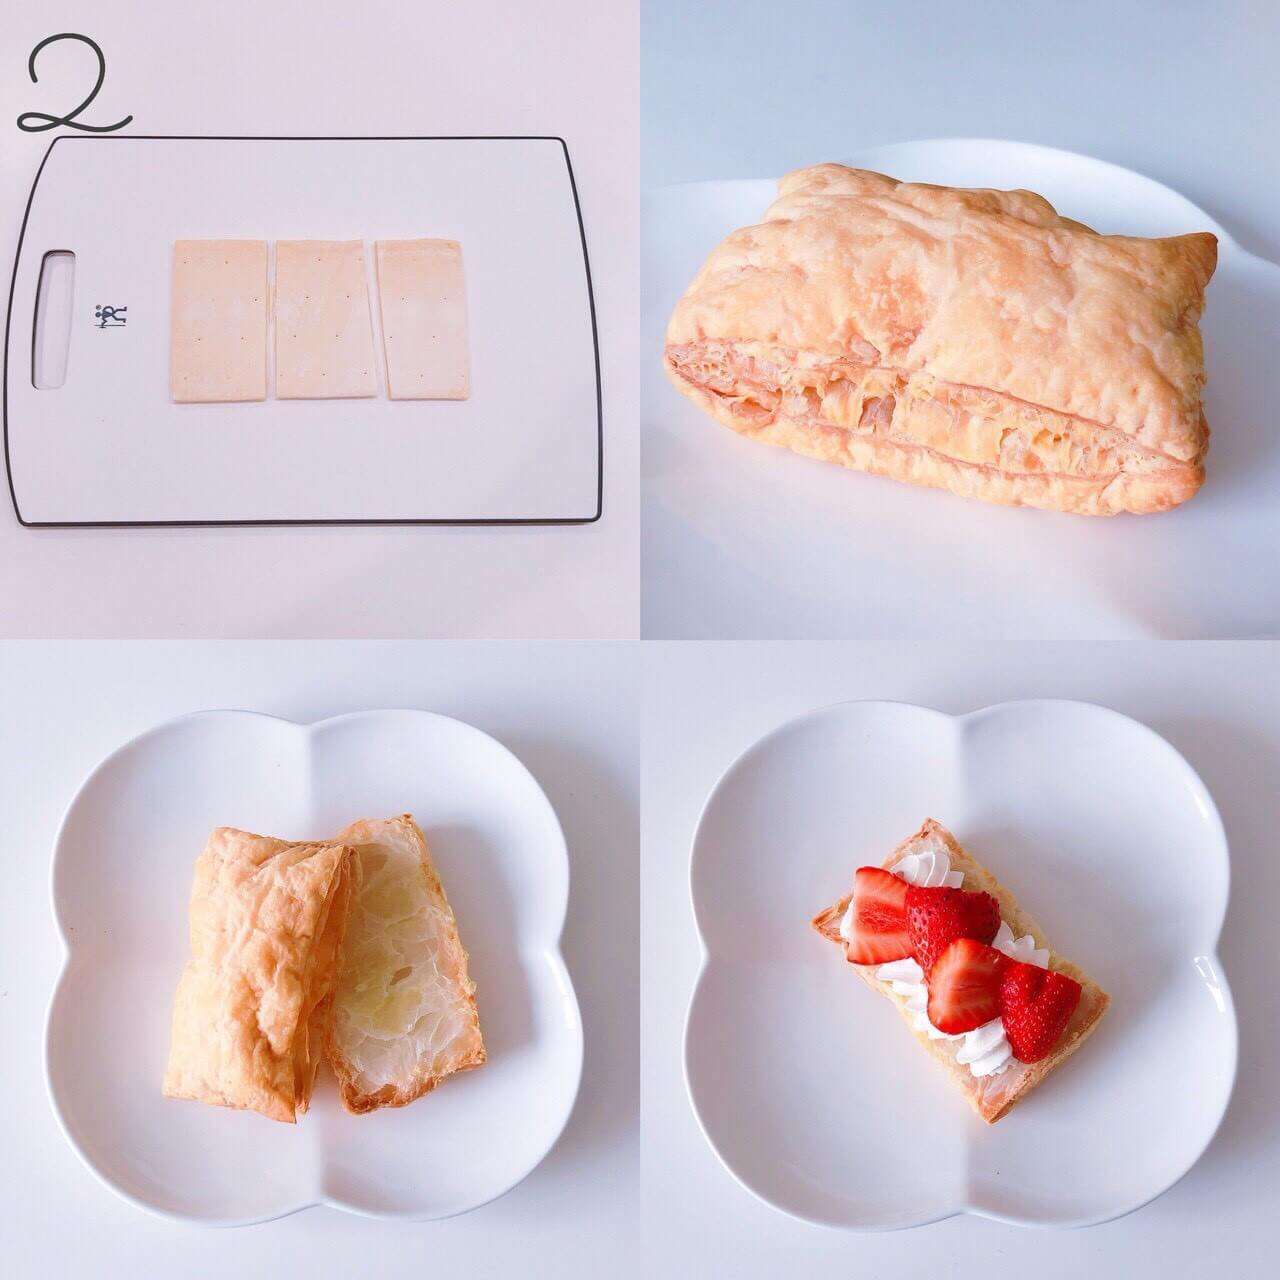 Kaori’s Easy Recipe – Learn how to make “Hello Kitty mille-feuille”